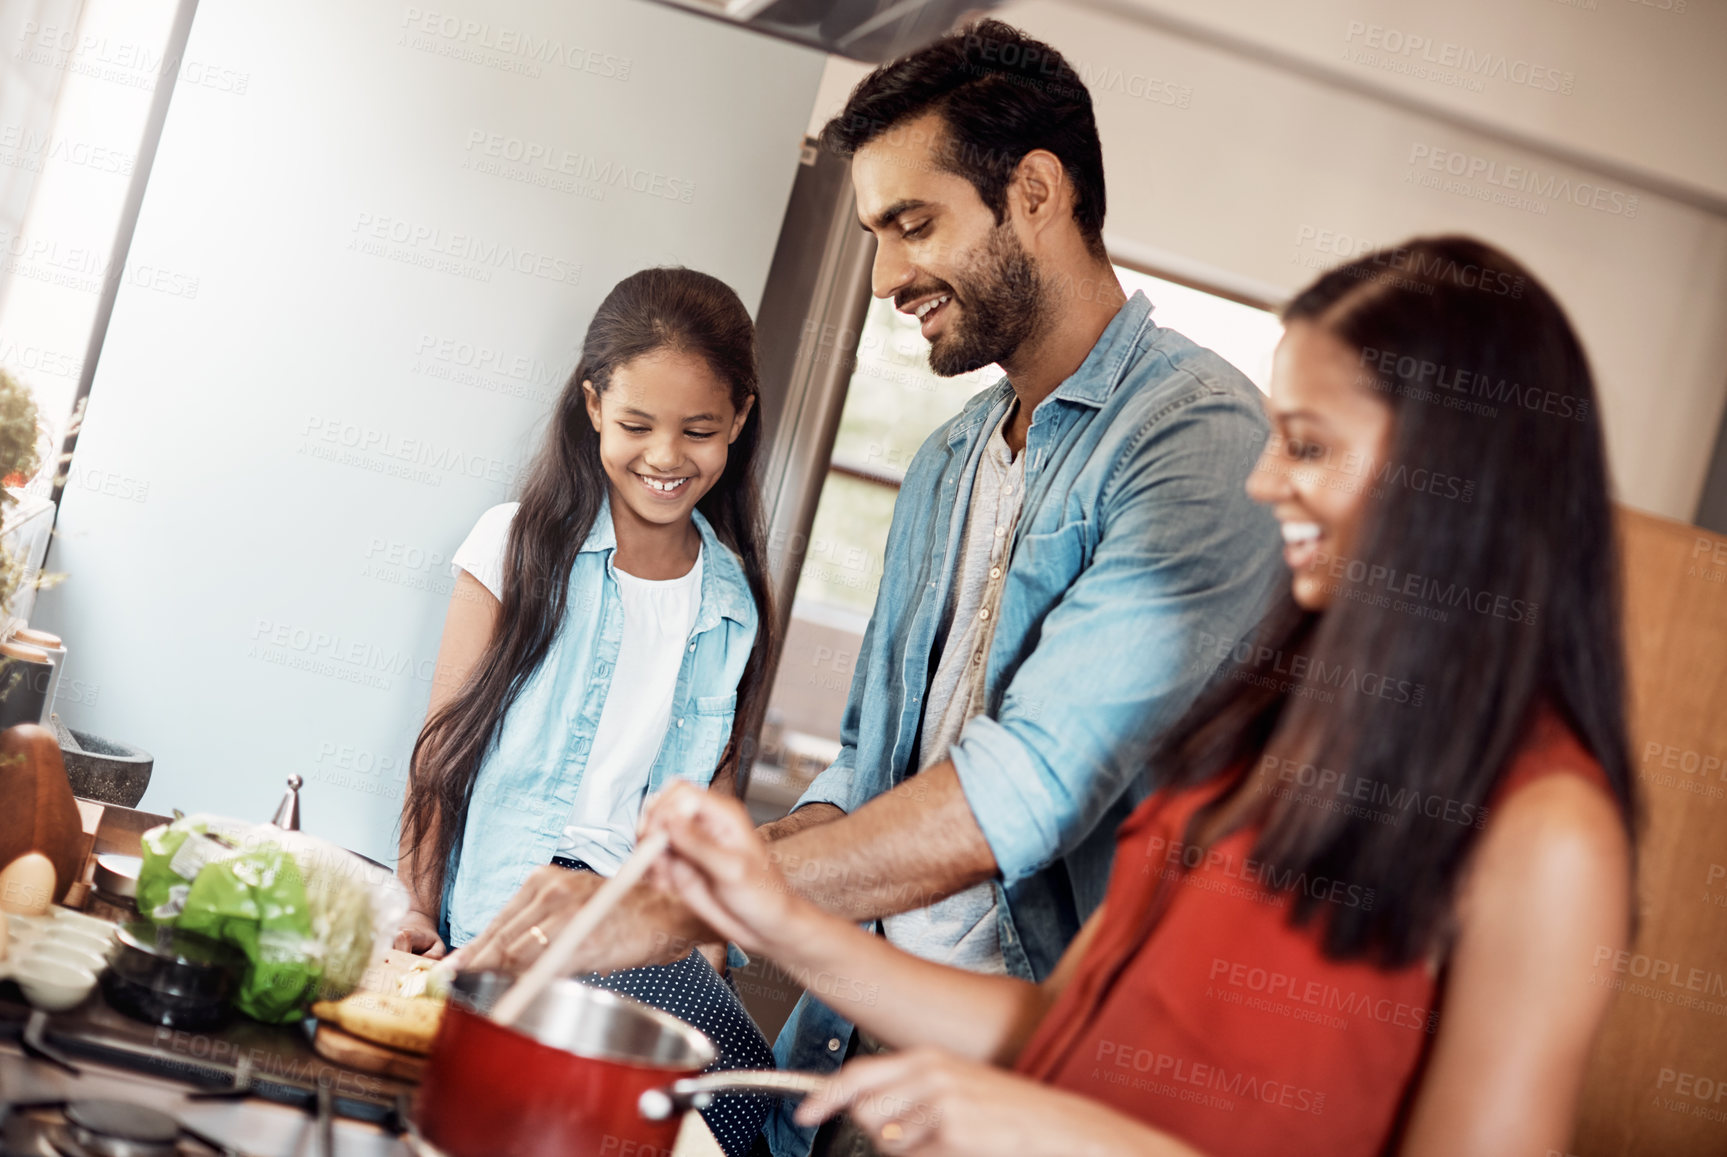 Buy stock photo Shot of a happy young family preparing a meal in the kitchen together at home